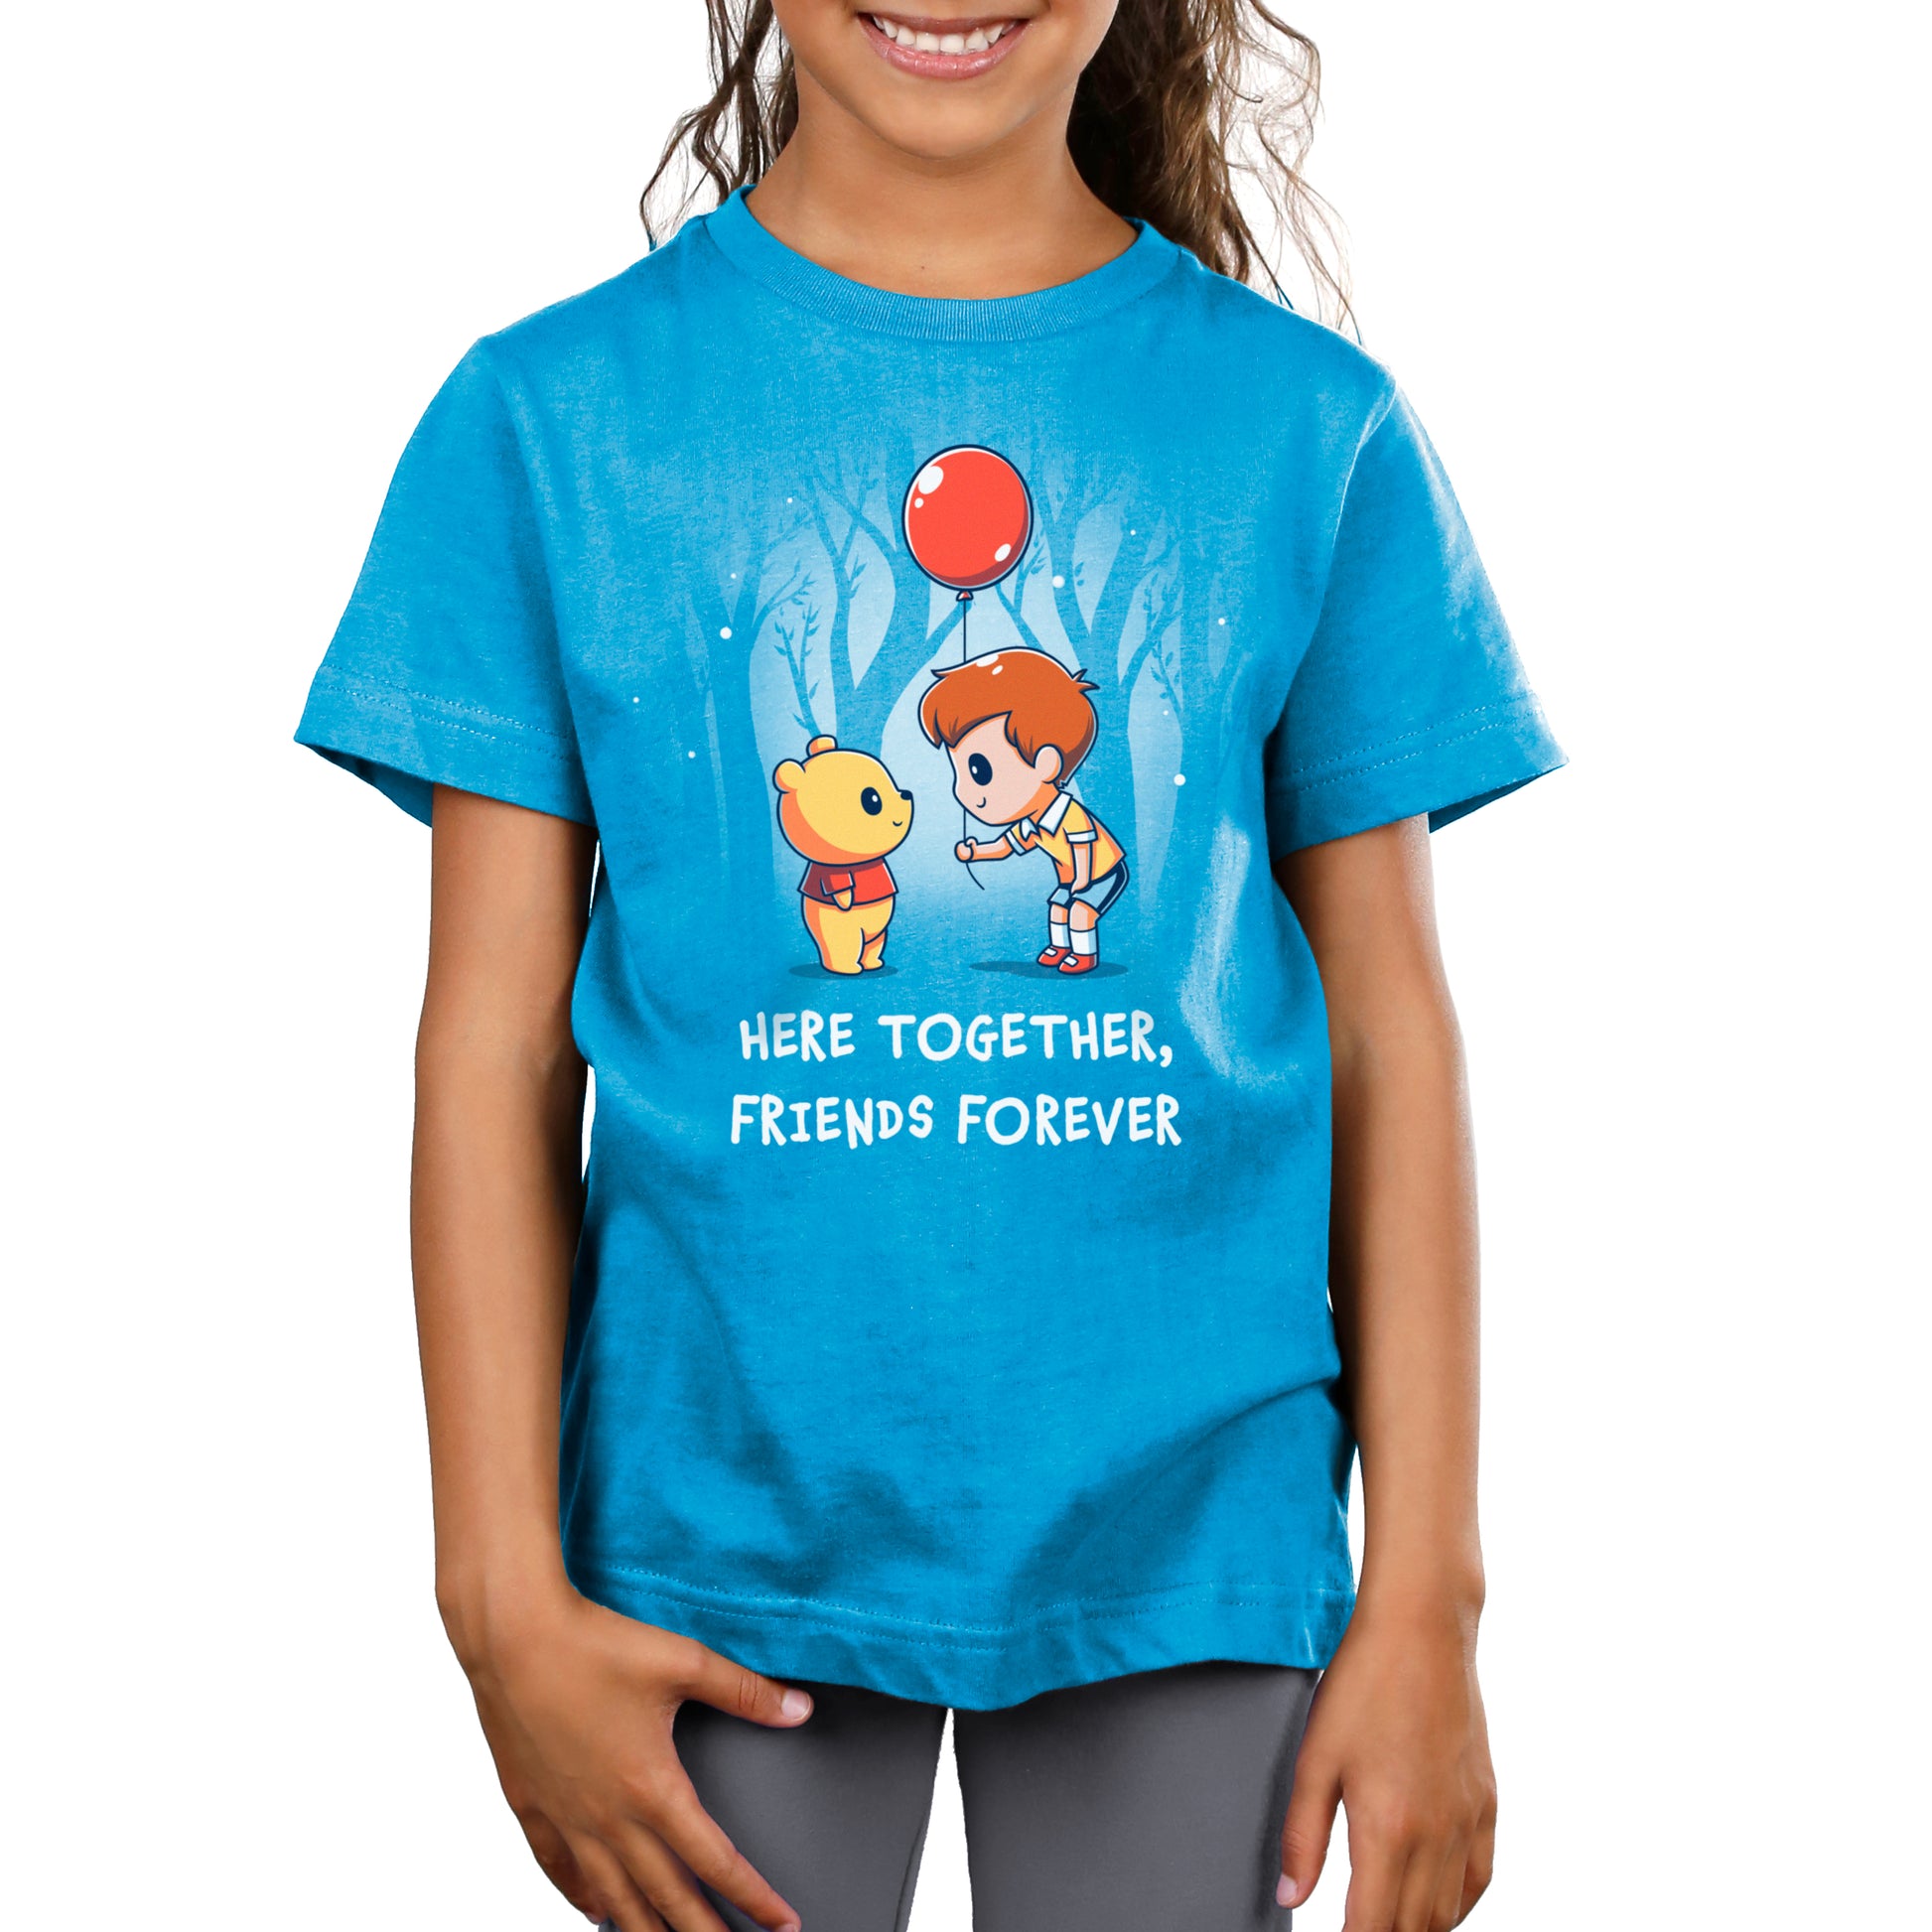 Officially licensed Disney Winnie the Pooh kids t-shirt.